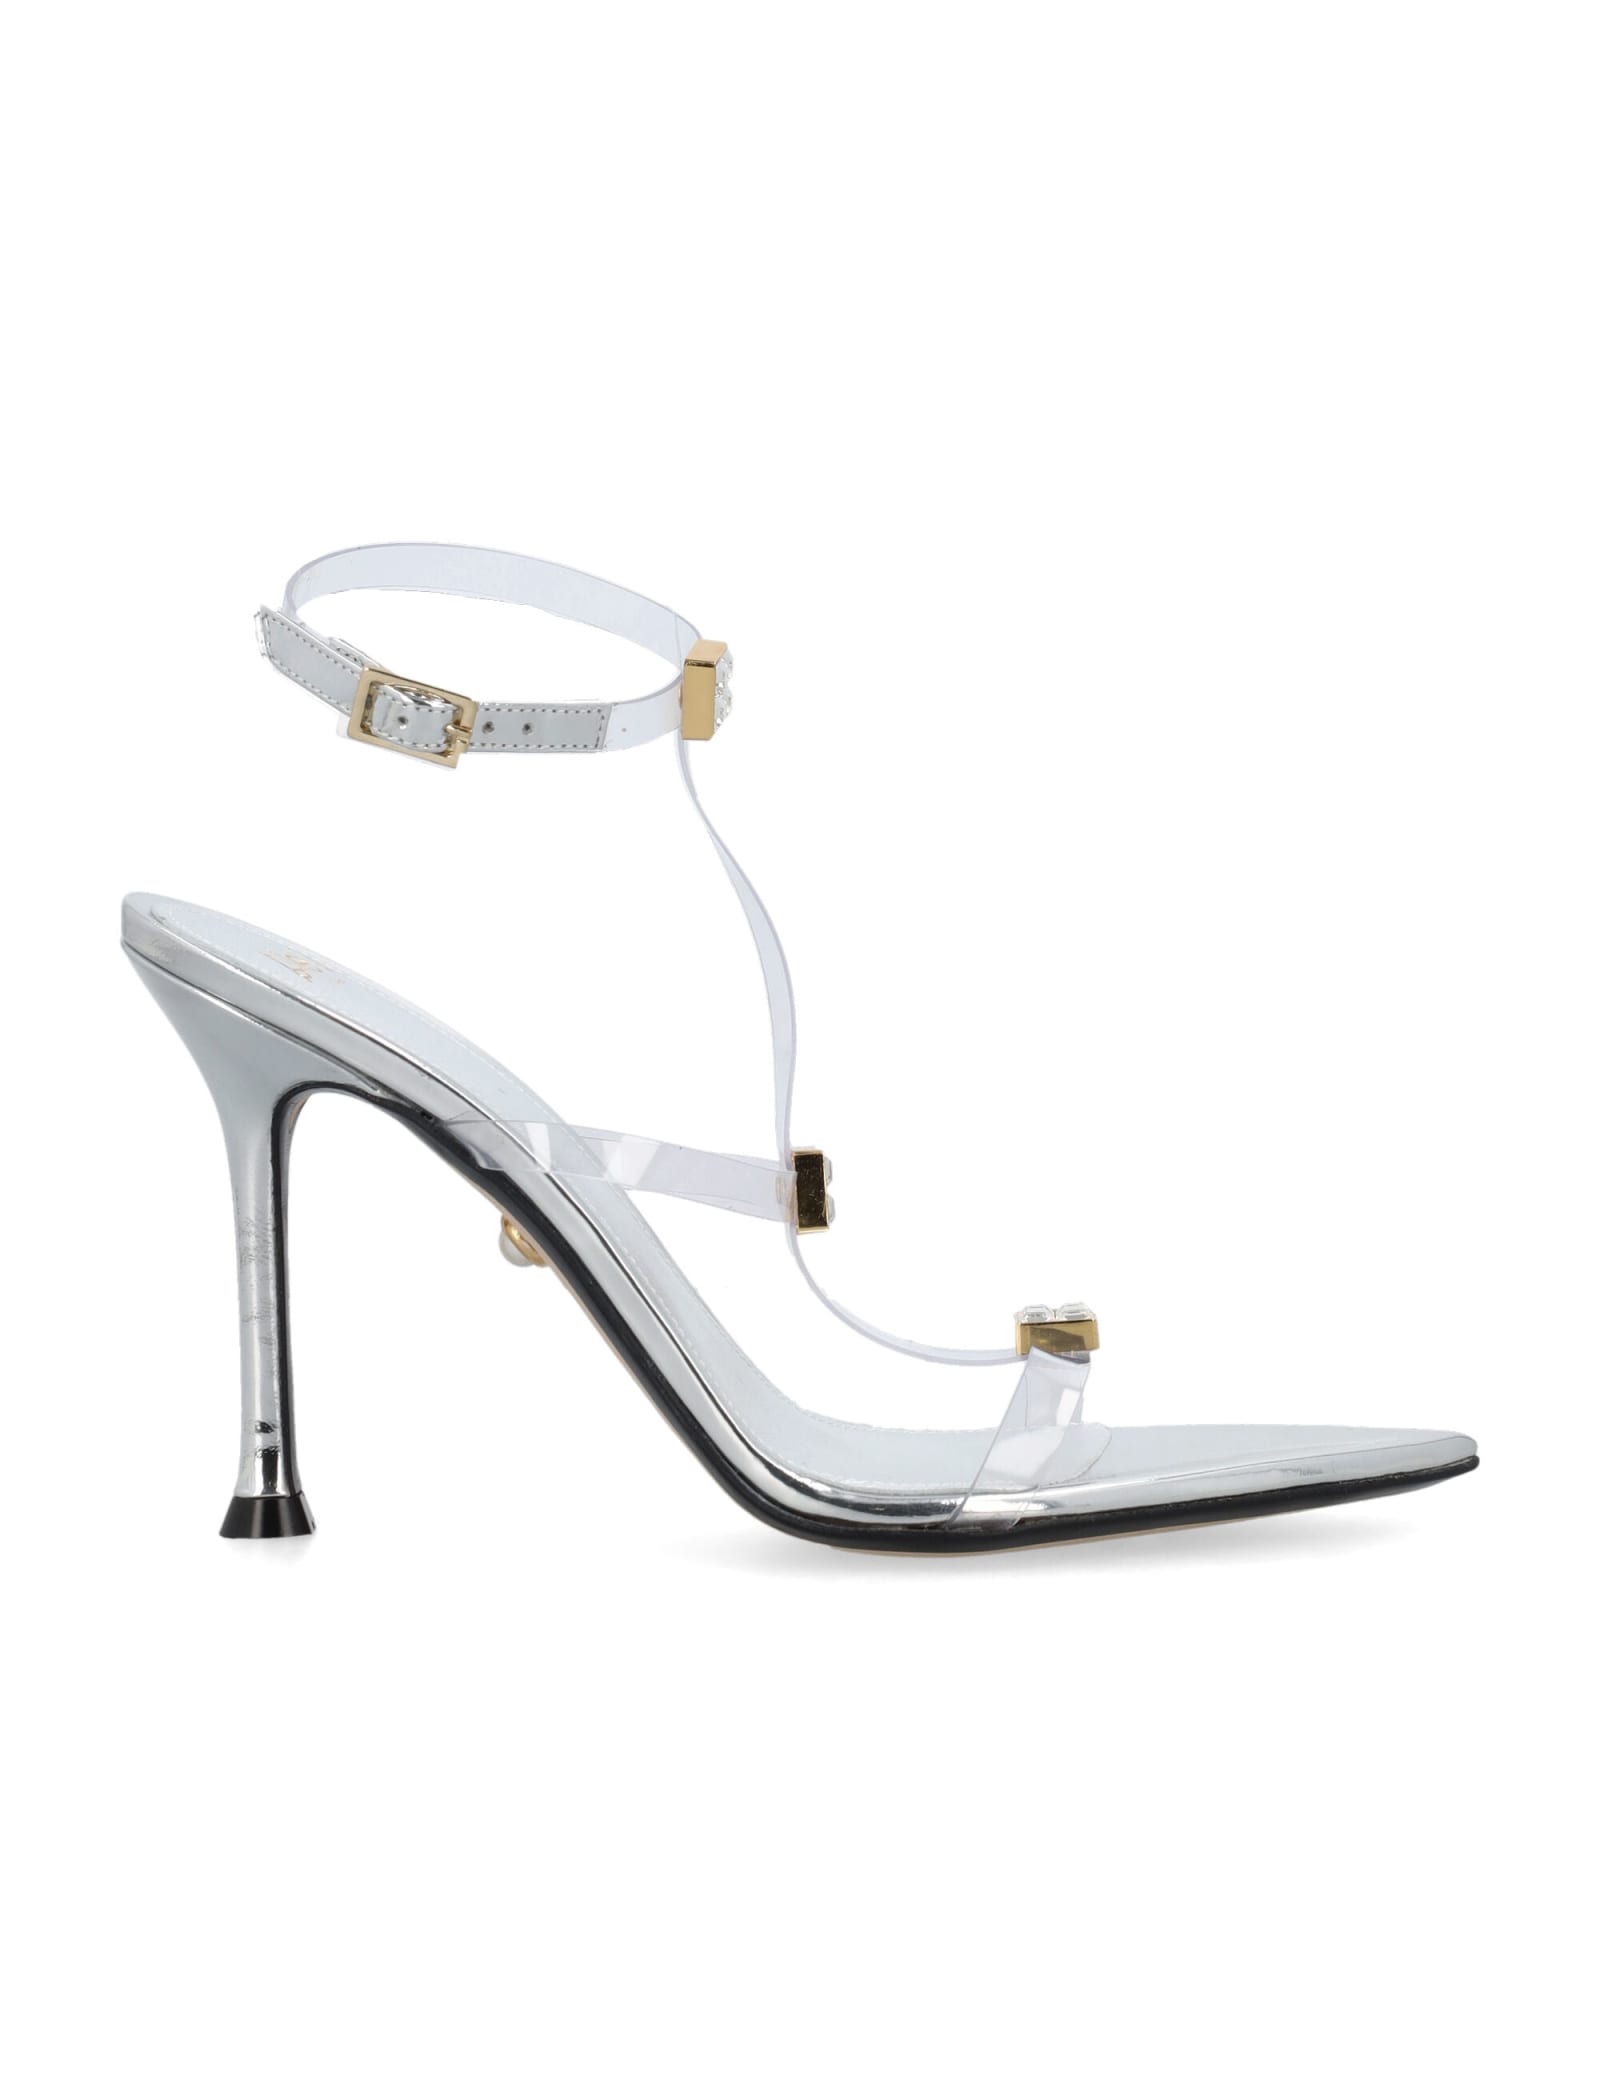 Addy 095 Nail Vegas Silver Sandals